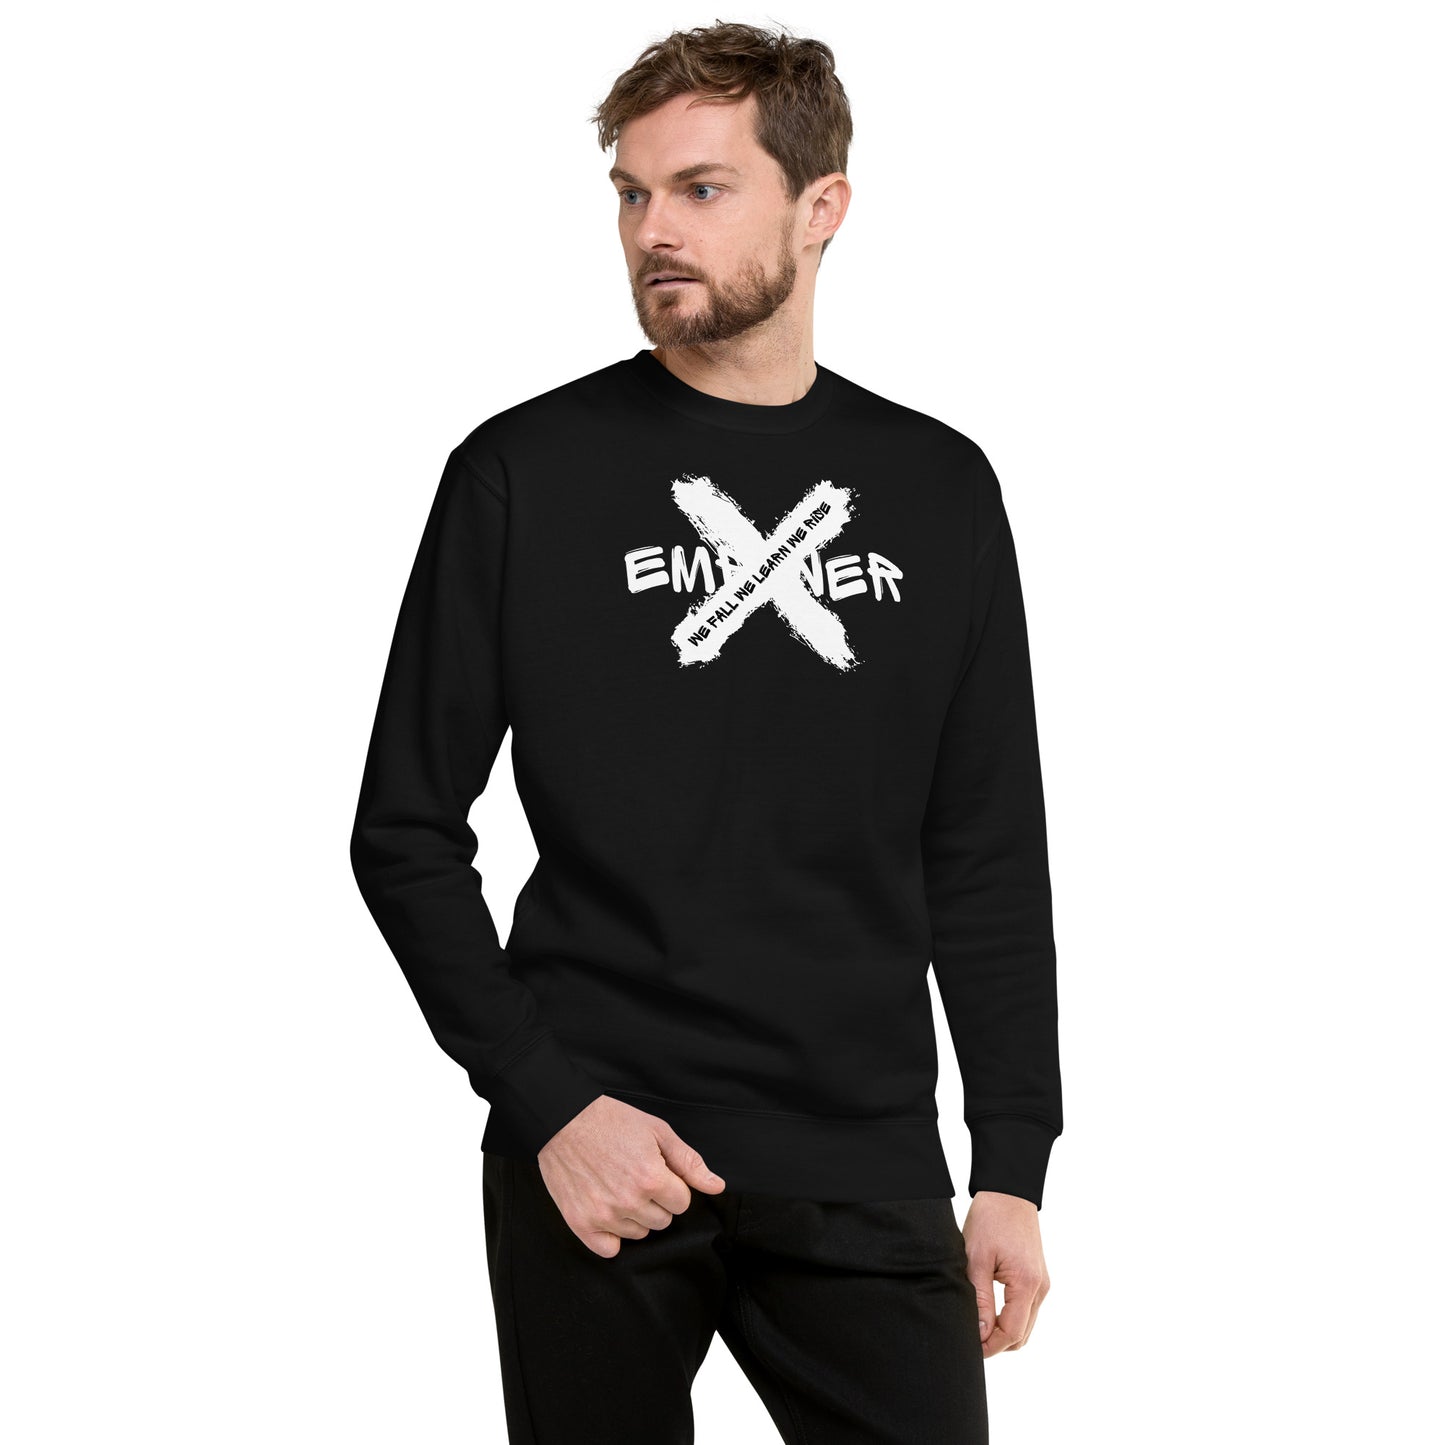 Black Empower X "We Fall We Learn We Rise" Quote Sweatshirt Jumper